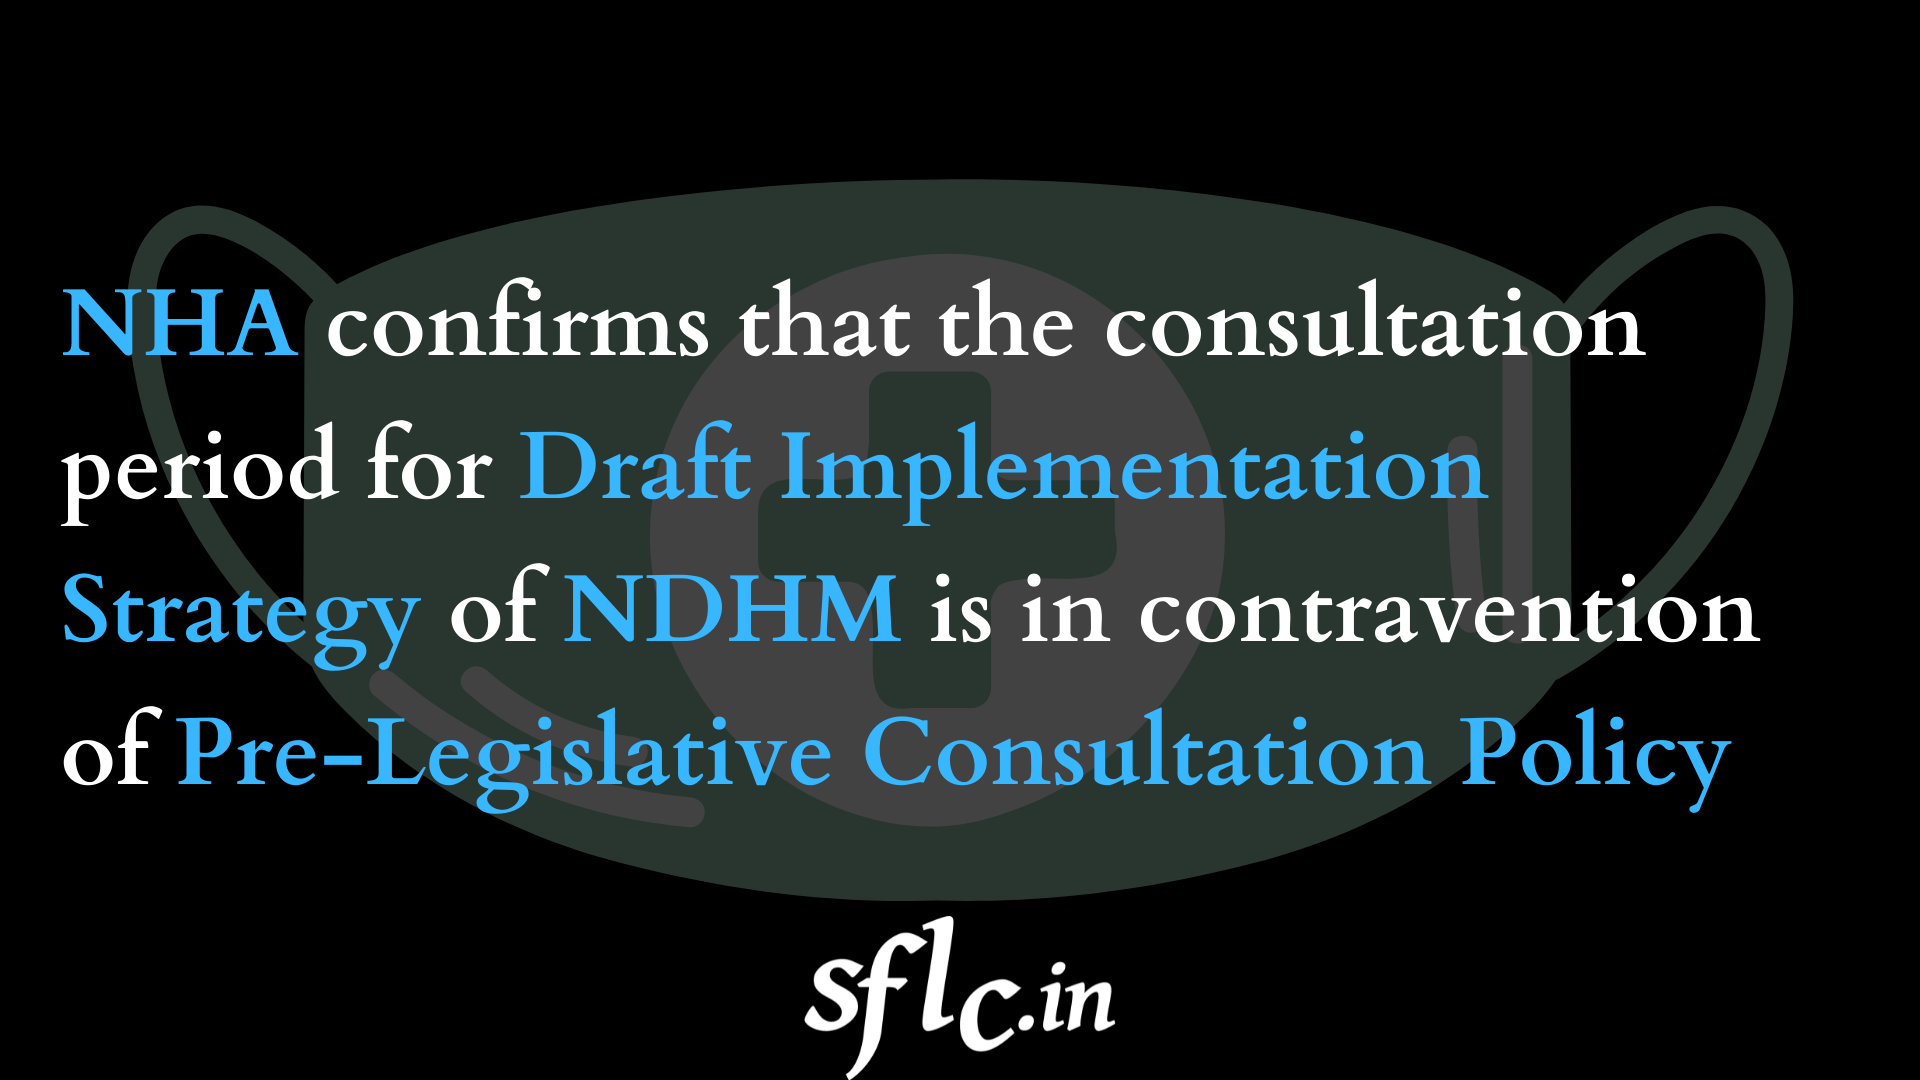 NHA confirms that the consultation period for Draft Implementation Strategy of NDHM is in contravention of Pre-Legislative Consultation Policy